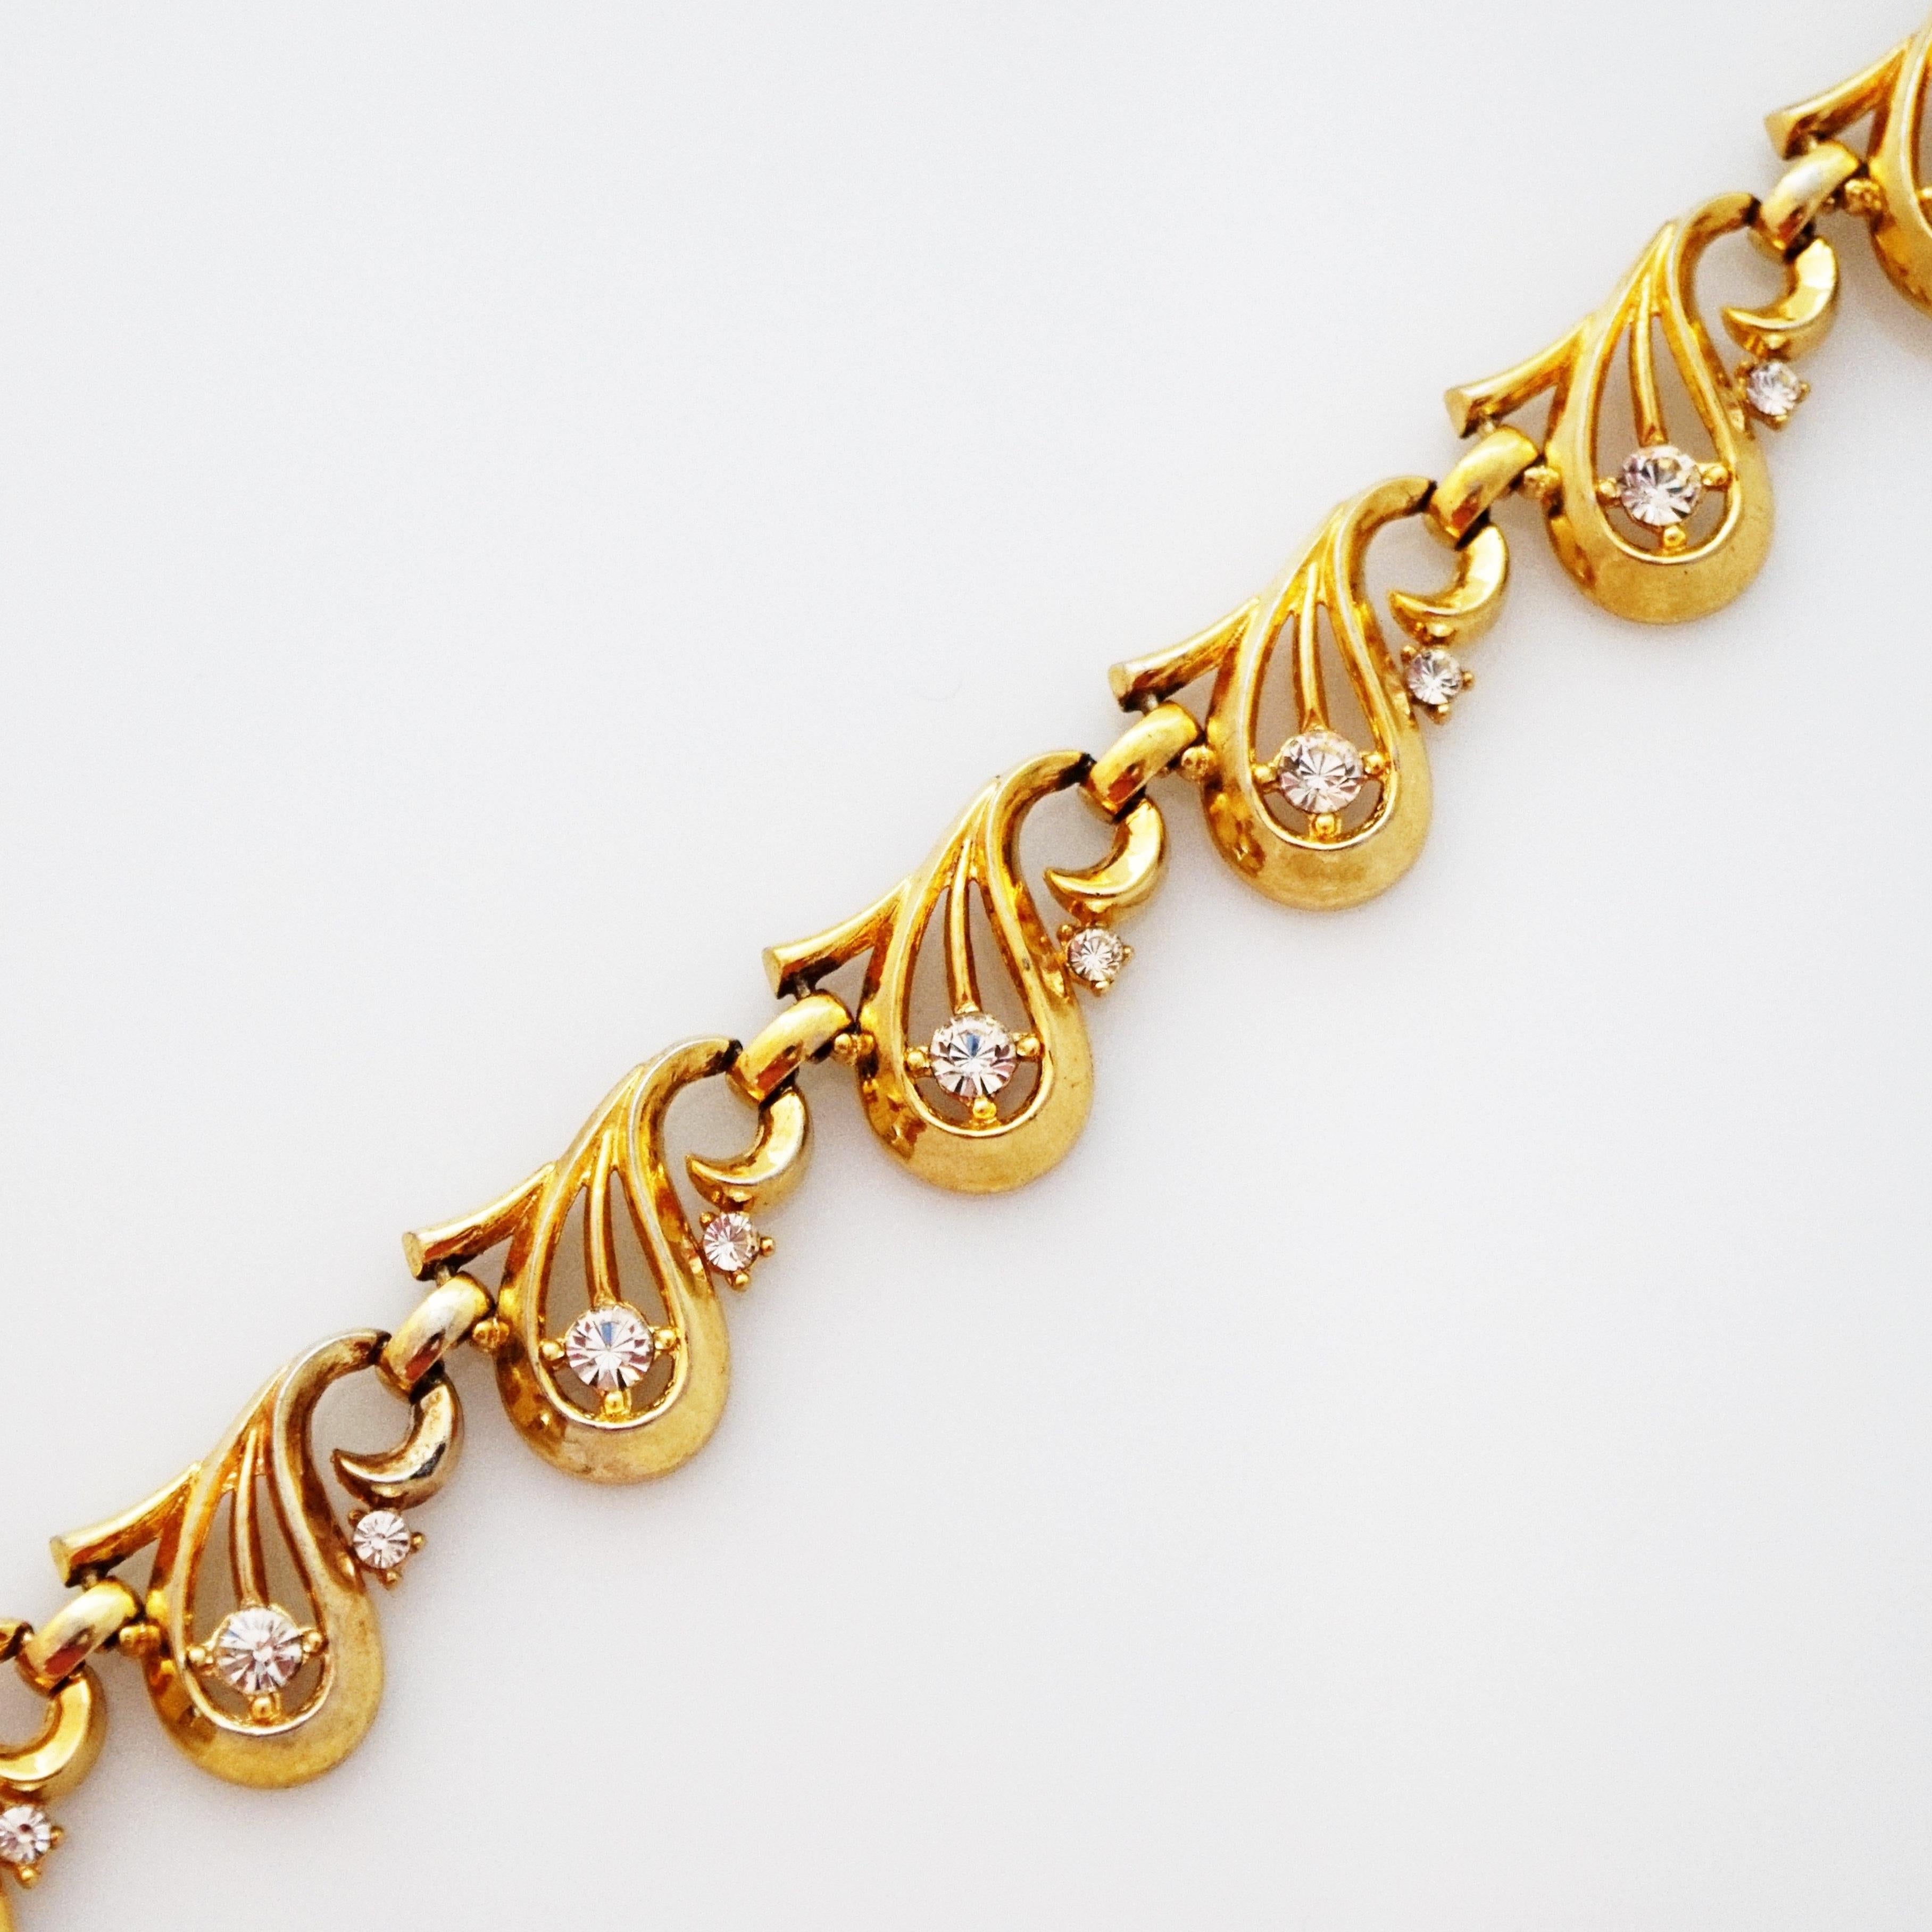 1940s Art Nouveau Teardrop Link Choker Necklace By Alfred Philippe For Trifari For Sale 1